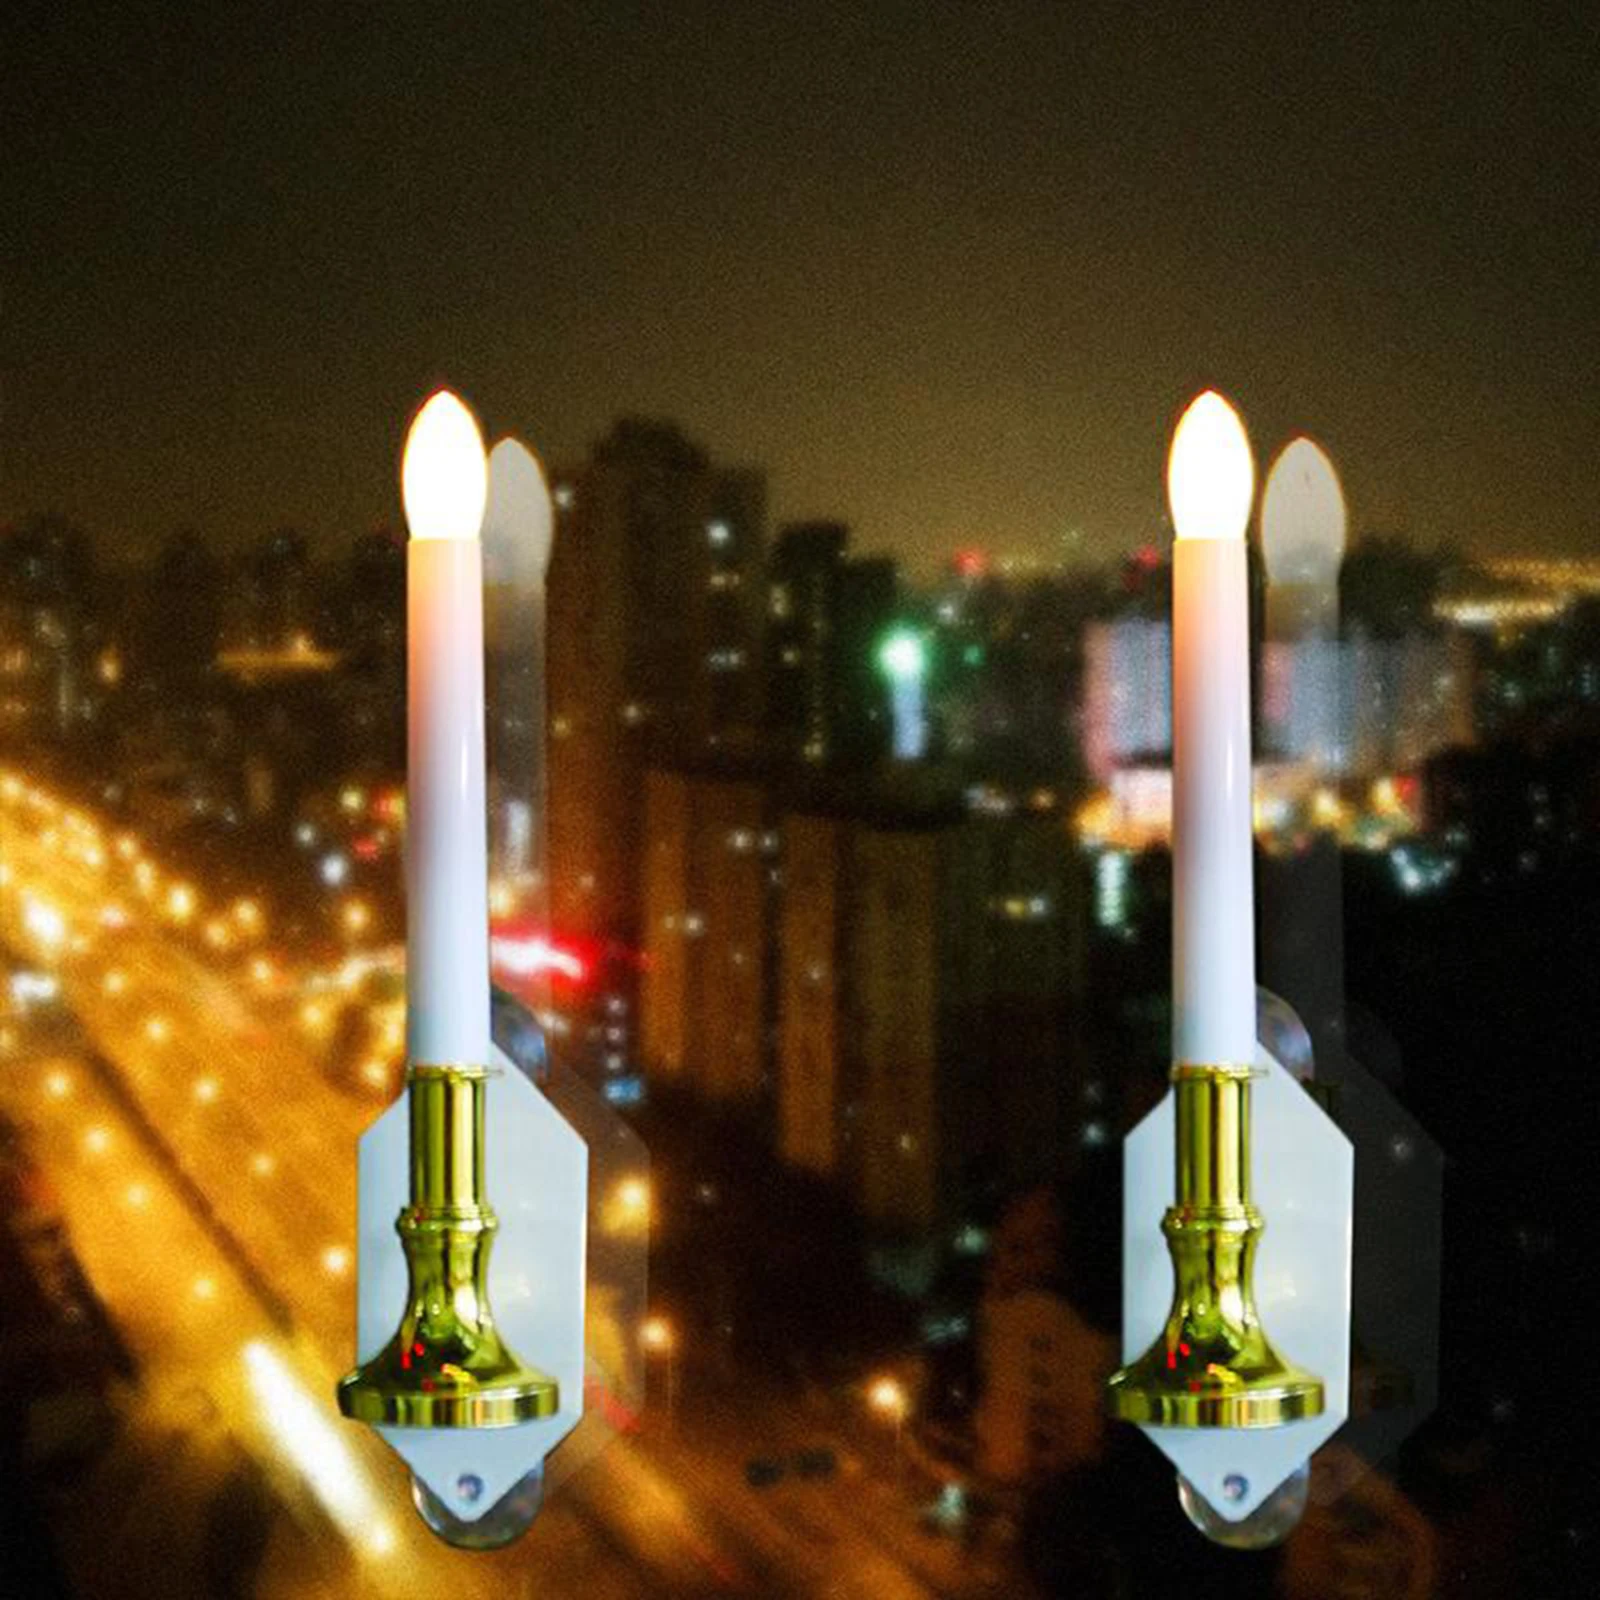 Flameless Taper Candles Flickering, Solar Powered Led Warm 3D Wick Light Window Candles, Christmas Home Wedding Decor